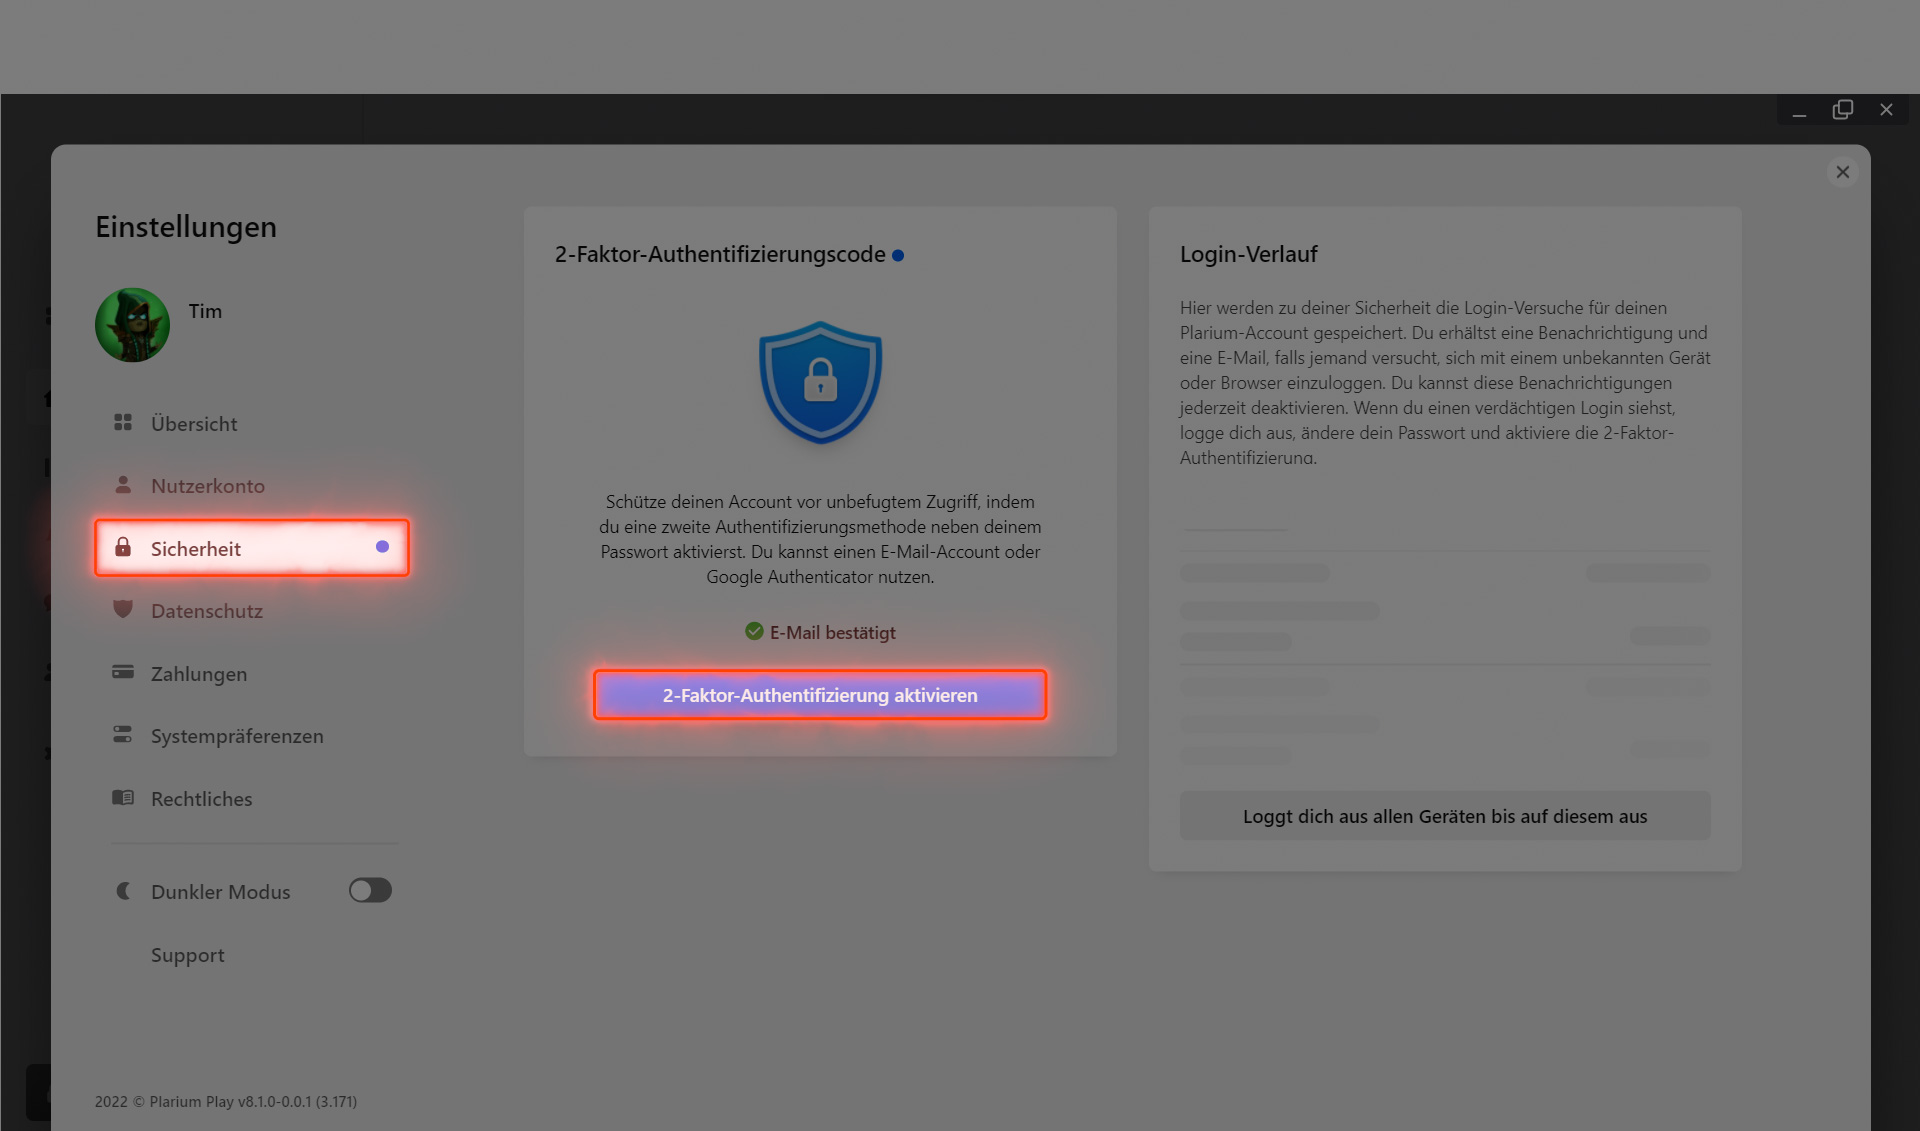 PP_FAQ_AccountSecurity_How do I enable and activate two-factor authentication_DE_2 (0-00-00-00).jpg